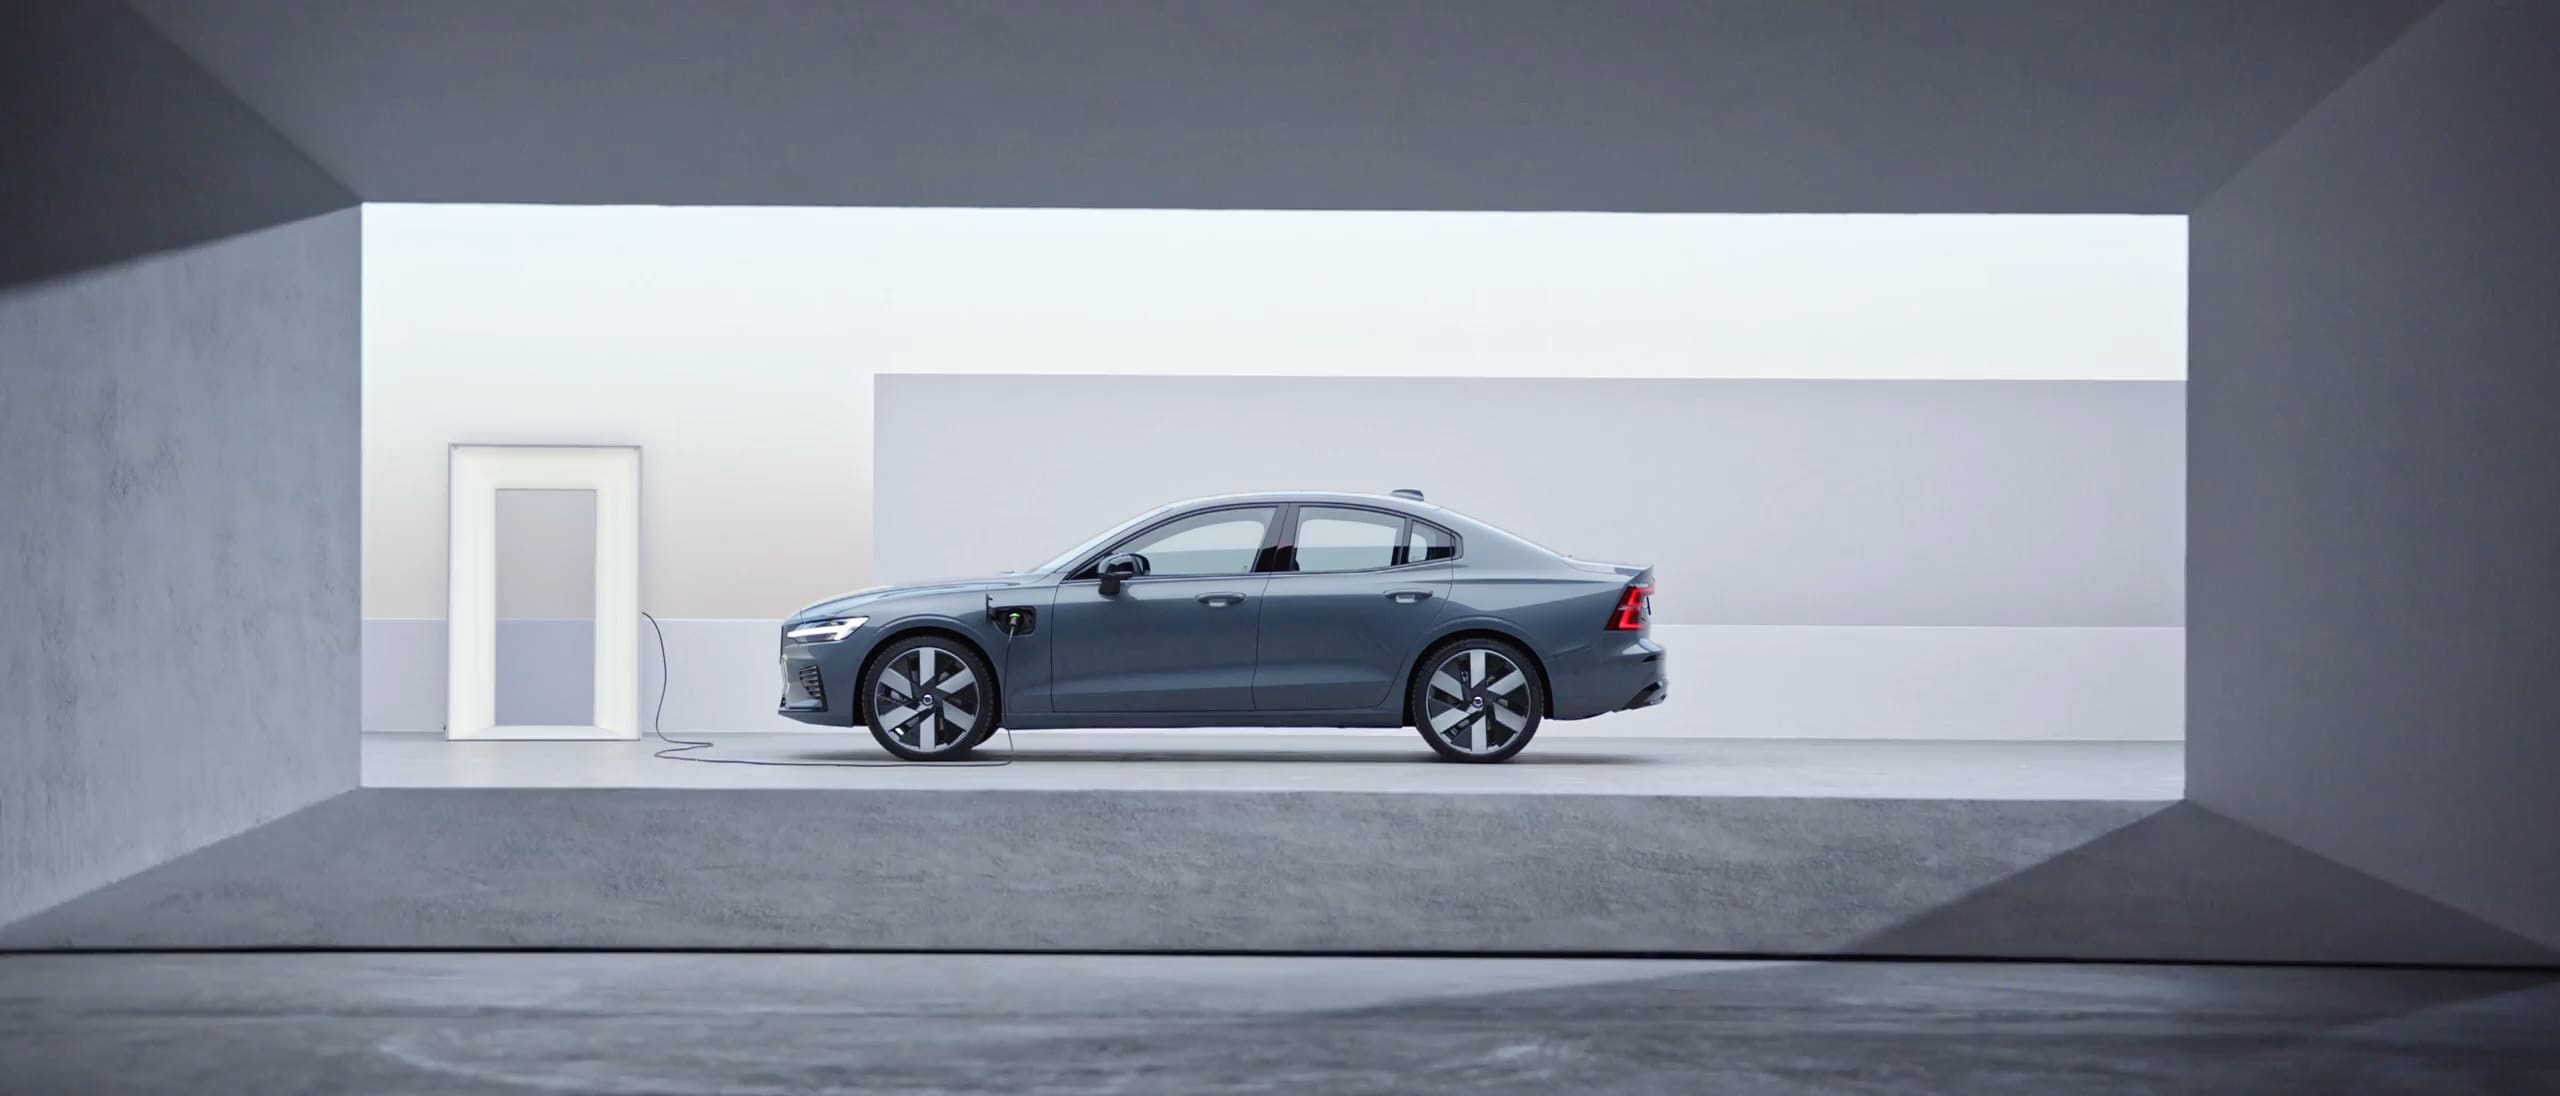 The side profile of a Volvo S60 Recharge plug-in hybrid.